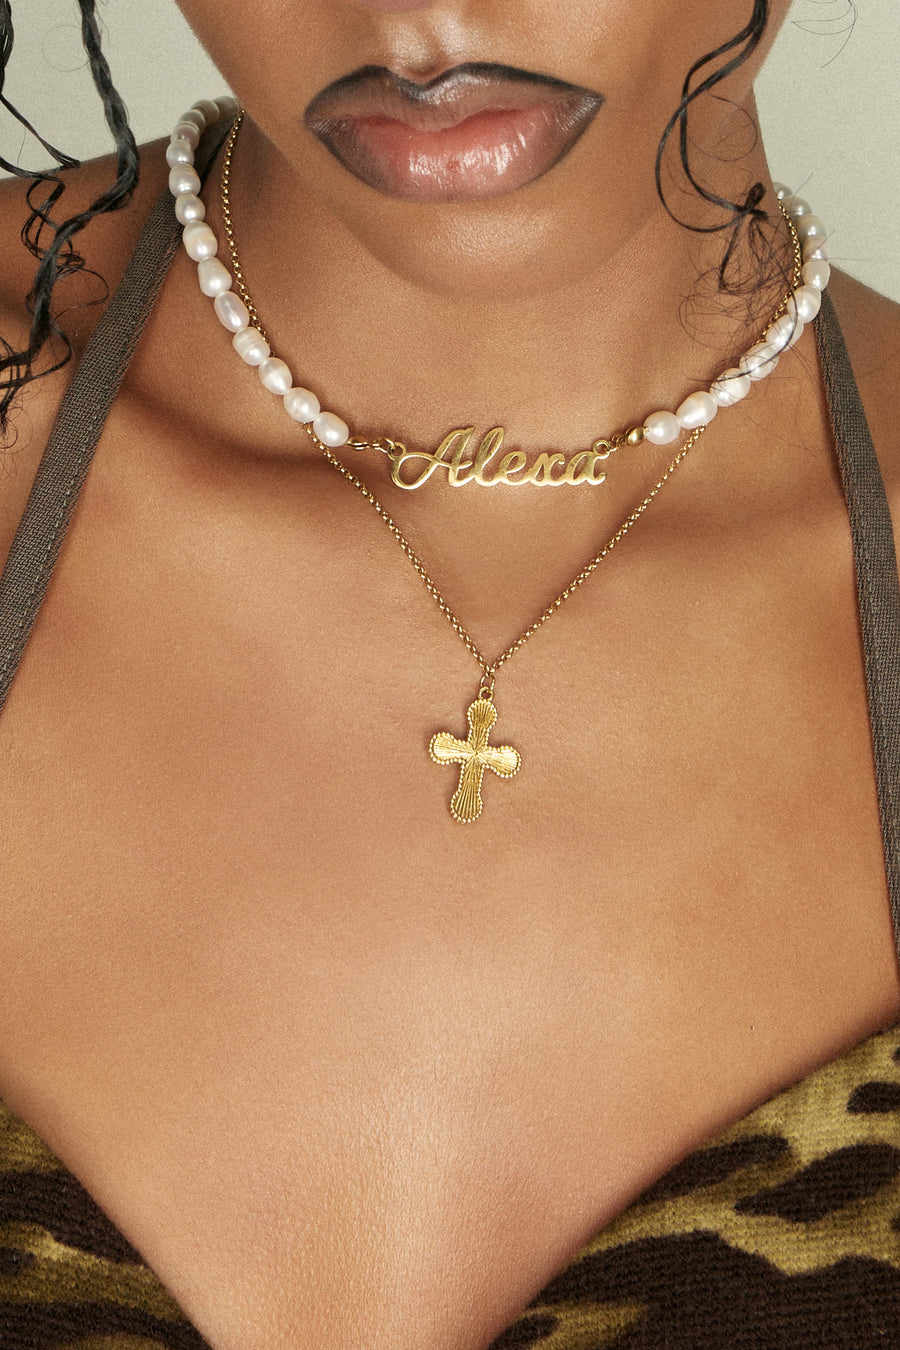 The Customized Pearl Necklace